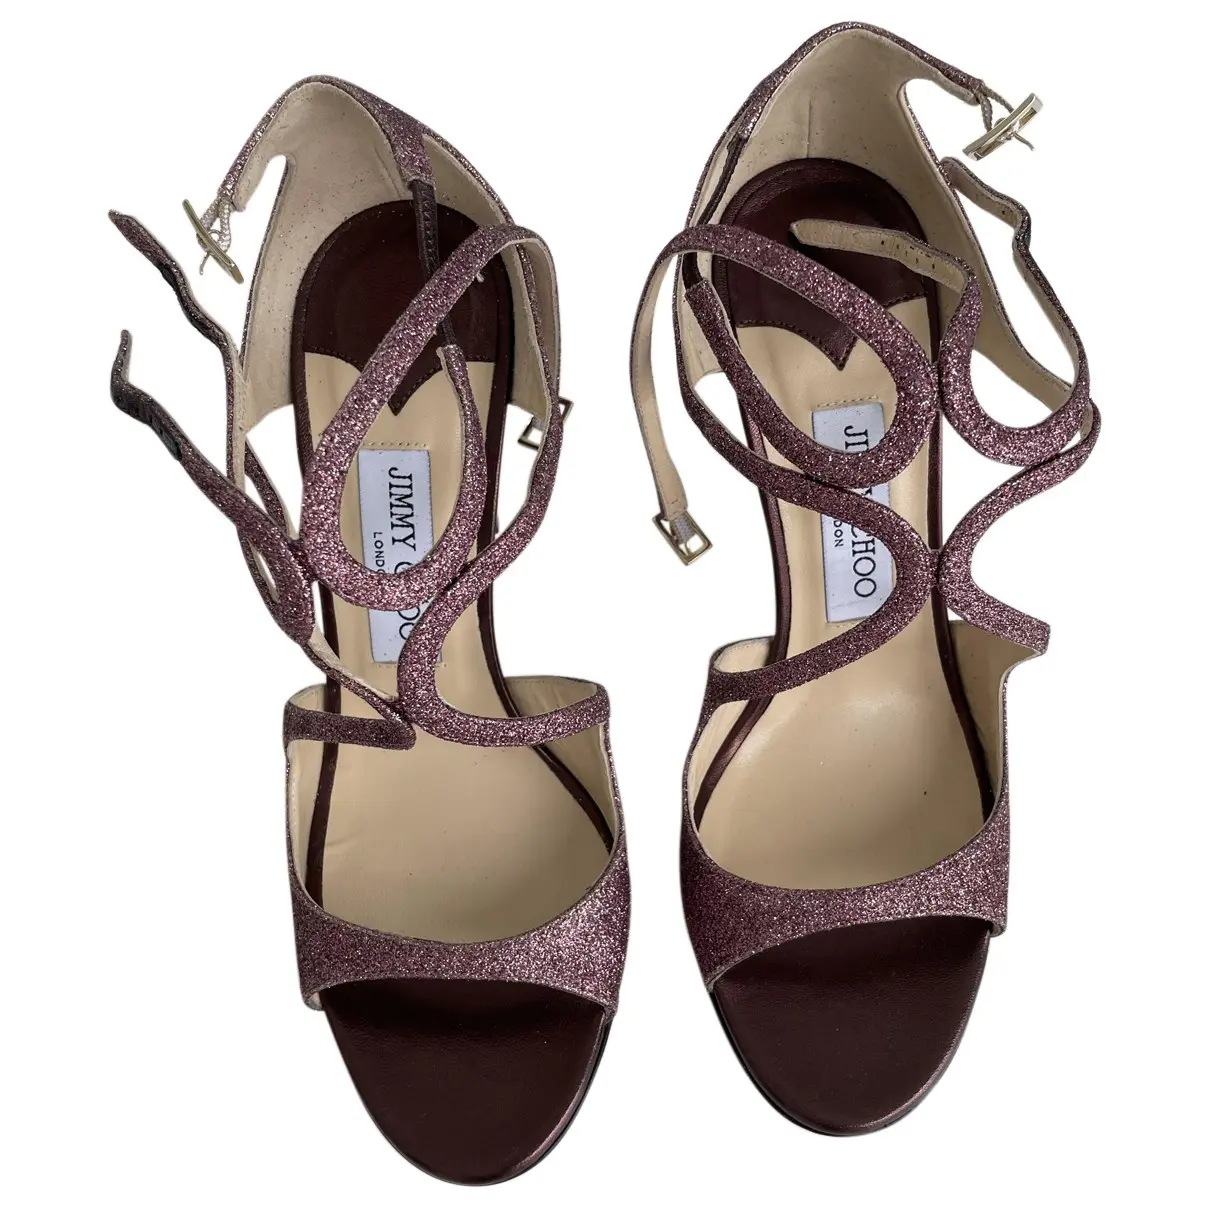 Lance patent leather sandals Jimmy Choo